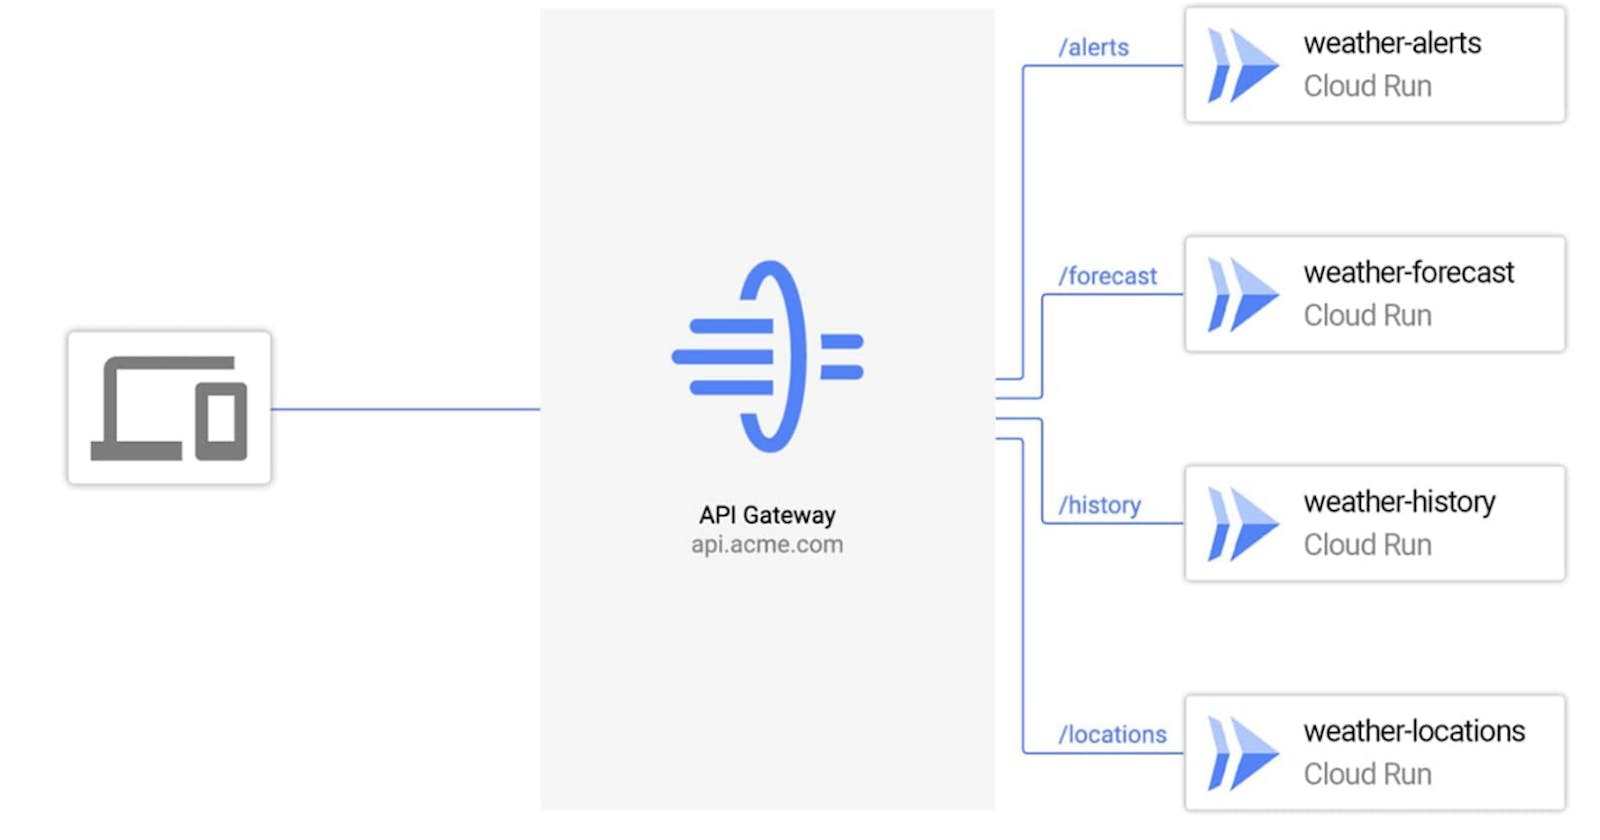 Deploy 2 FastAPI  microservice in GKE with Ingress Controller and expose them using GCP API Gateway